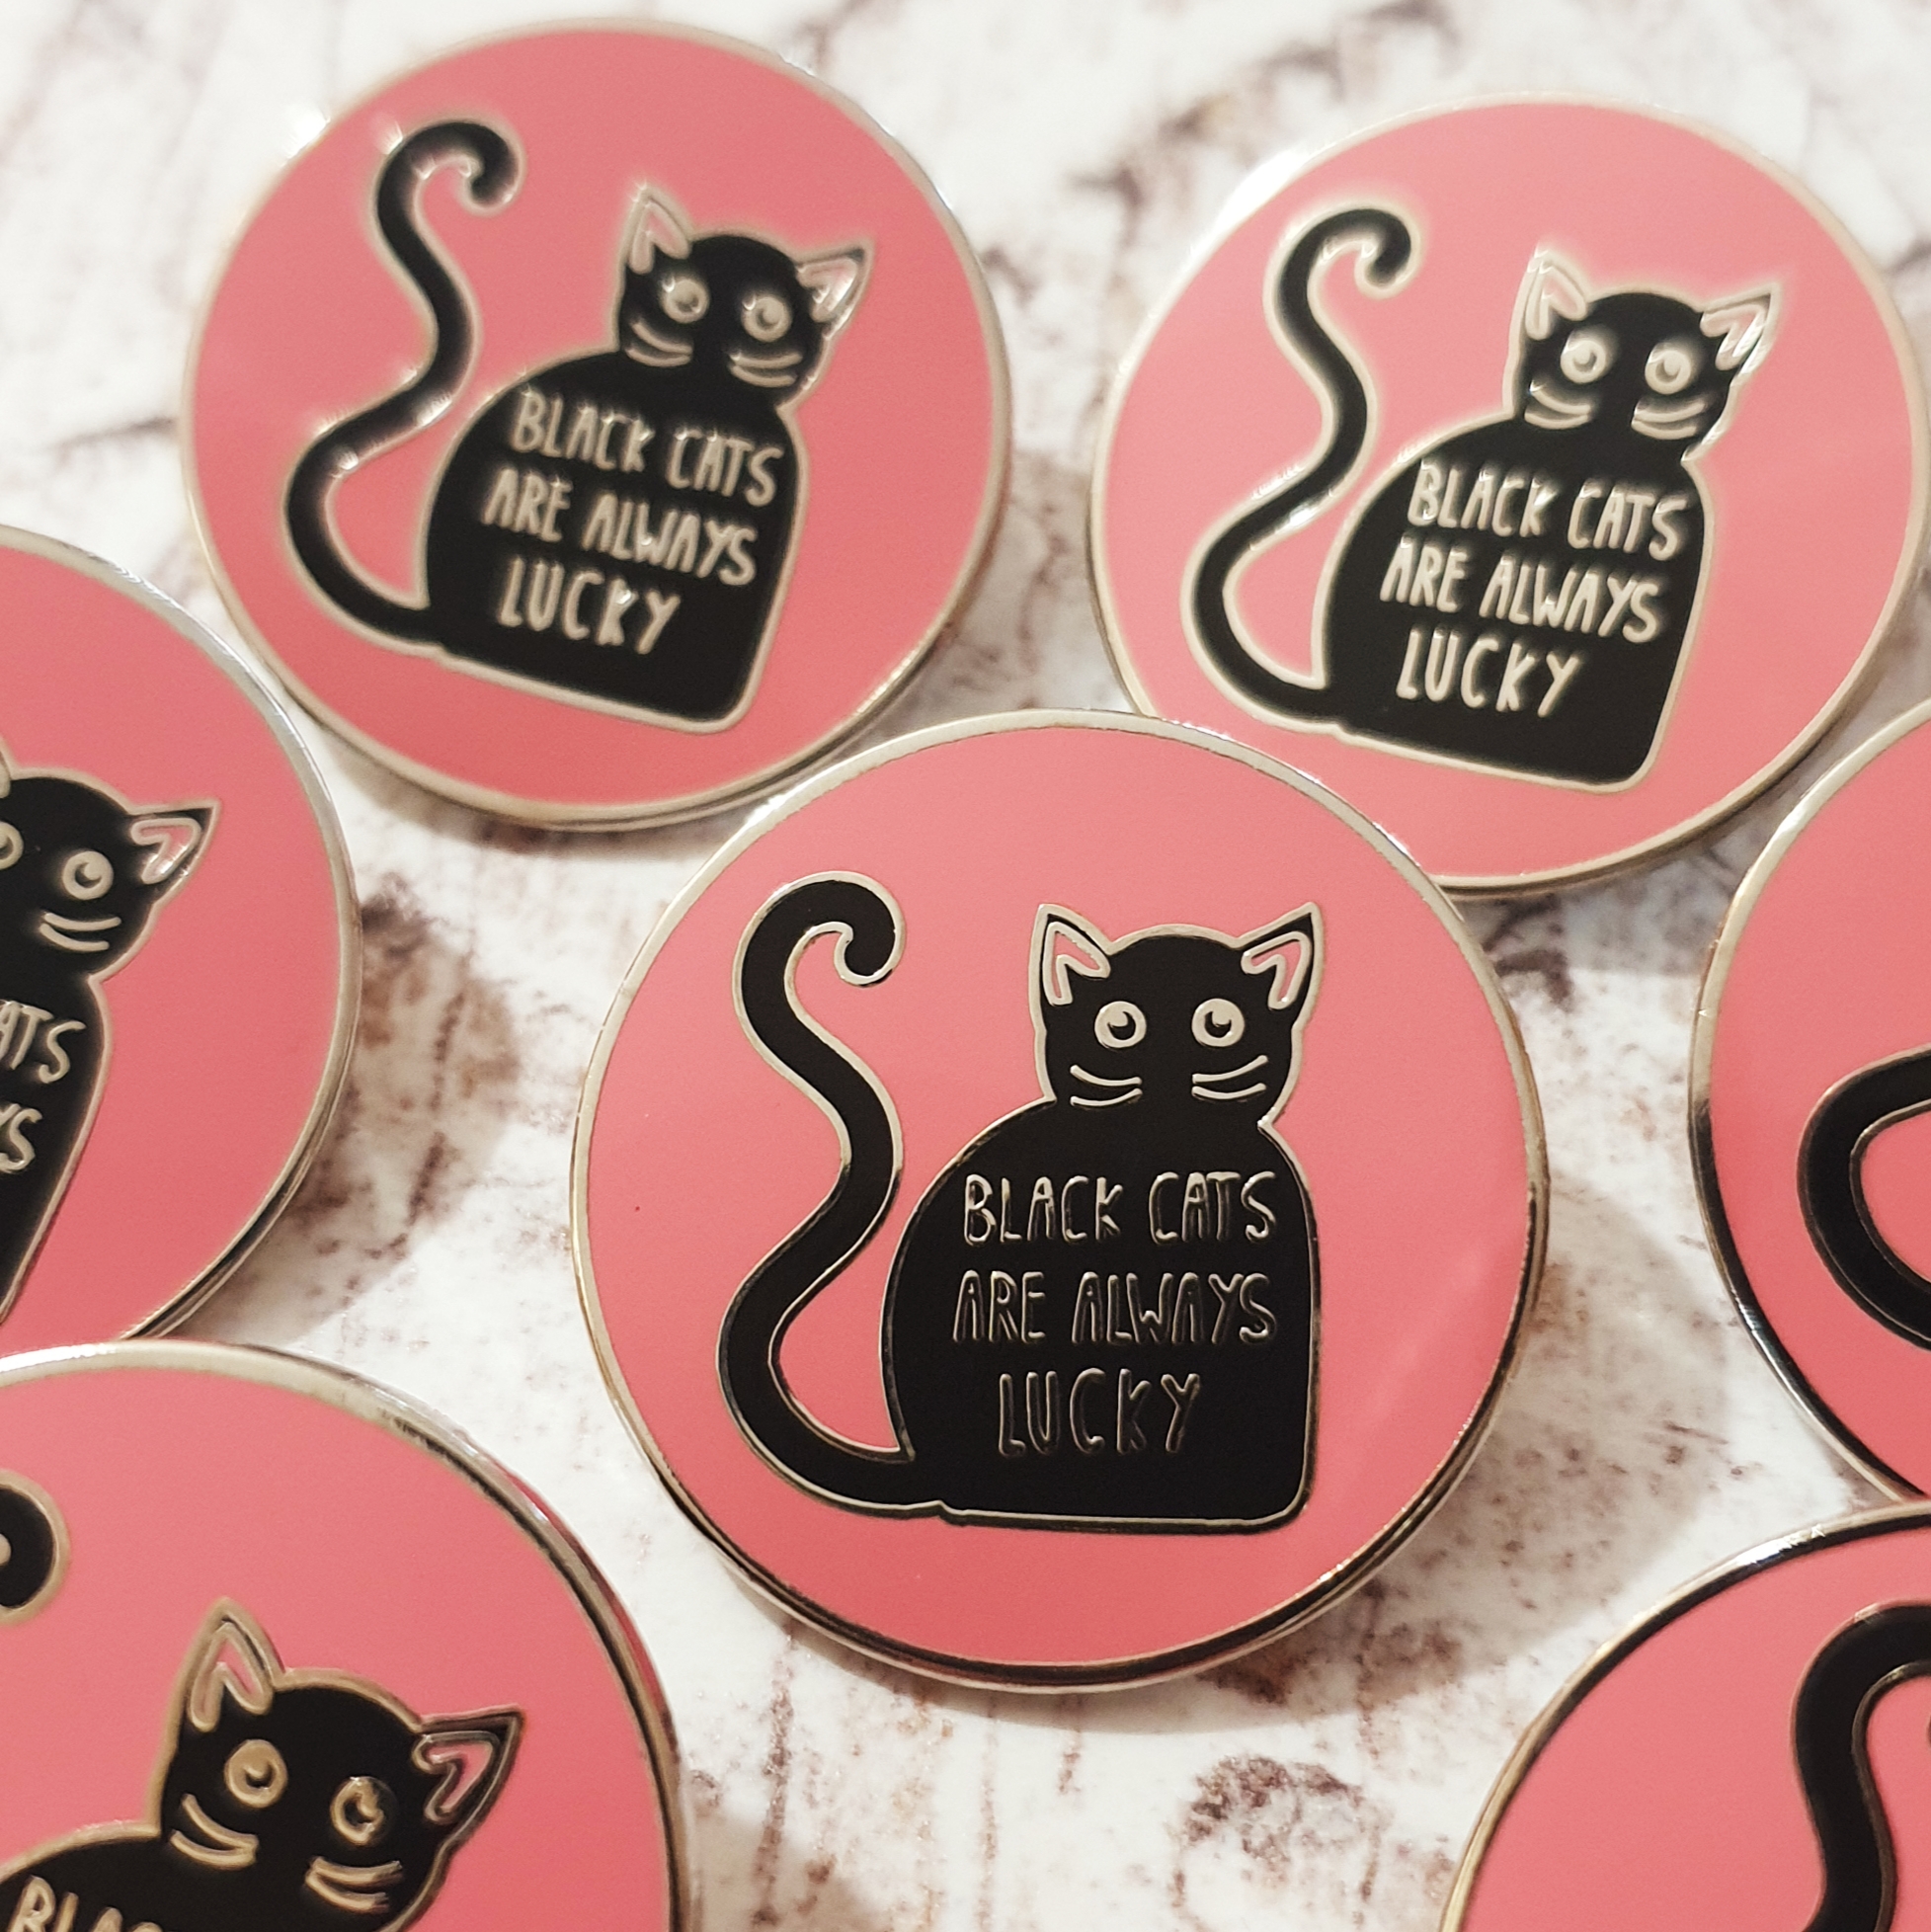 Black cats are always lucky enamel pin daffodowndilly. Daffodowndilly Our Shops. Sharing independent shops online at Love Our Shops UK shopping directory.